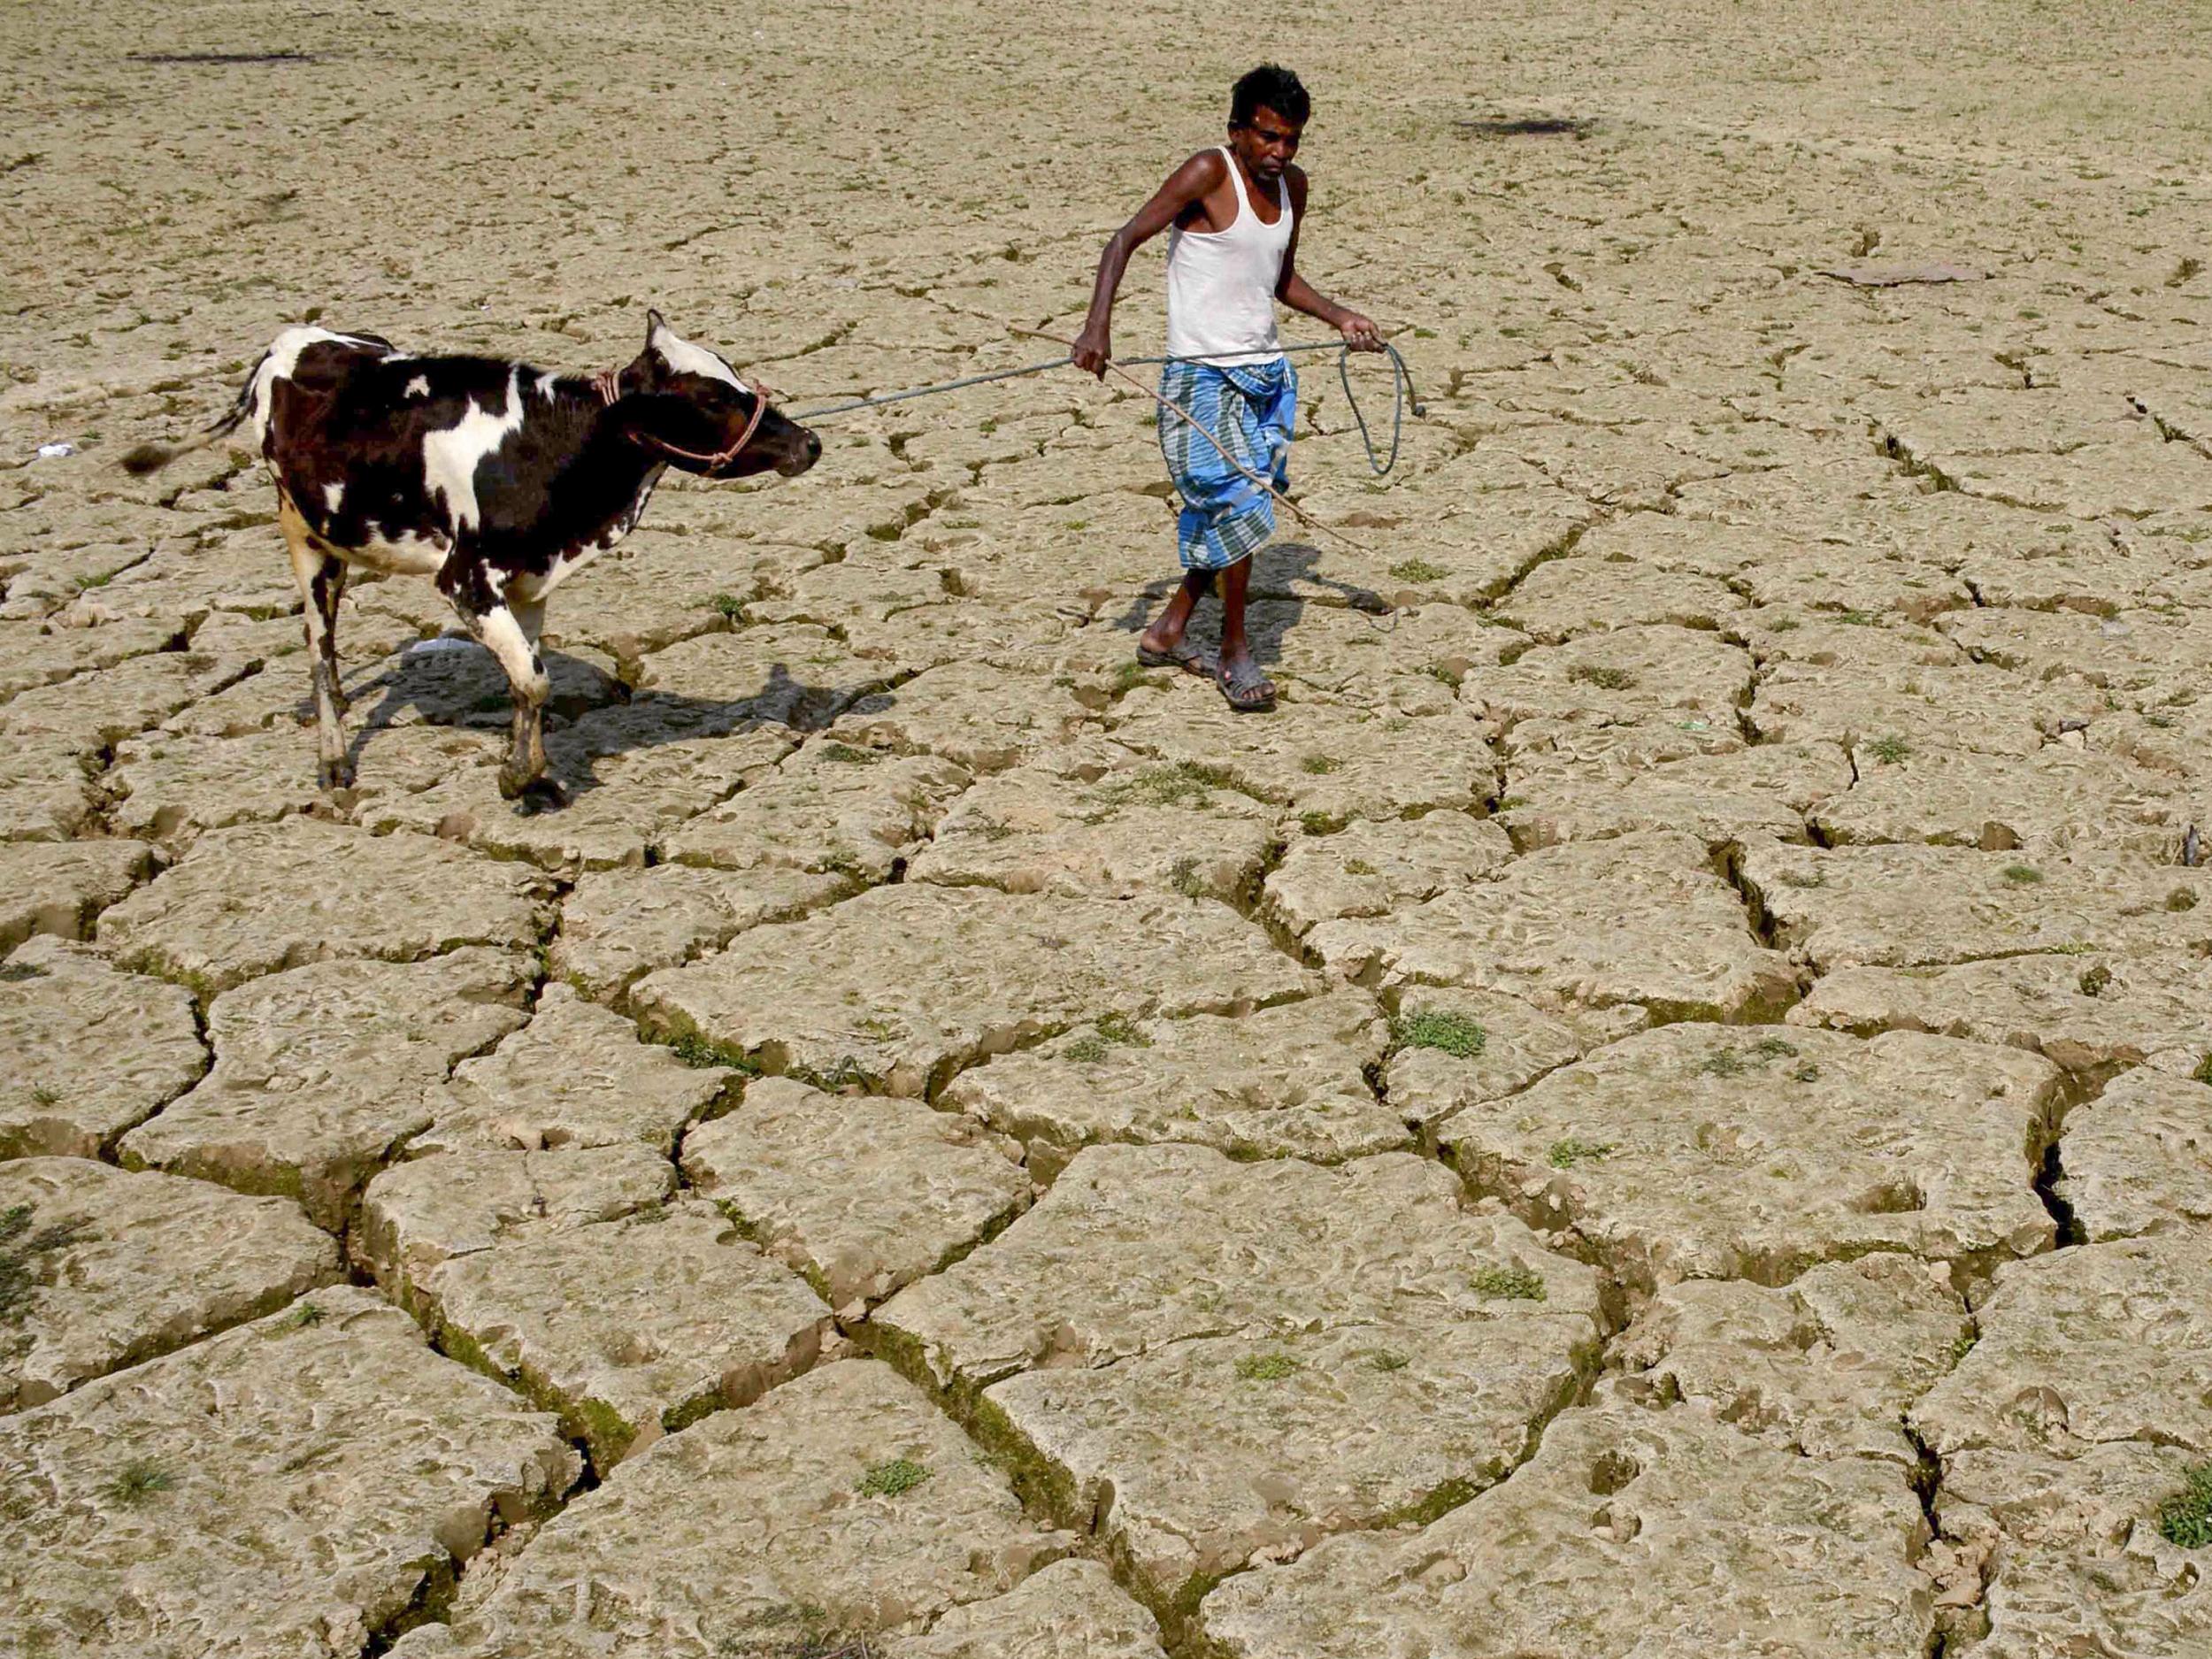 Water scarcity and crop failure are two of the climate change-induced problems that will force people to migrate